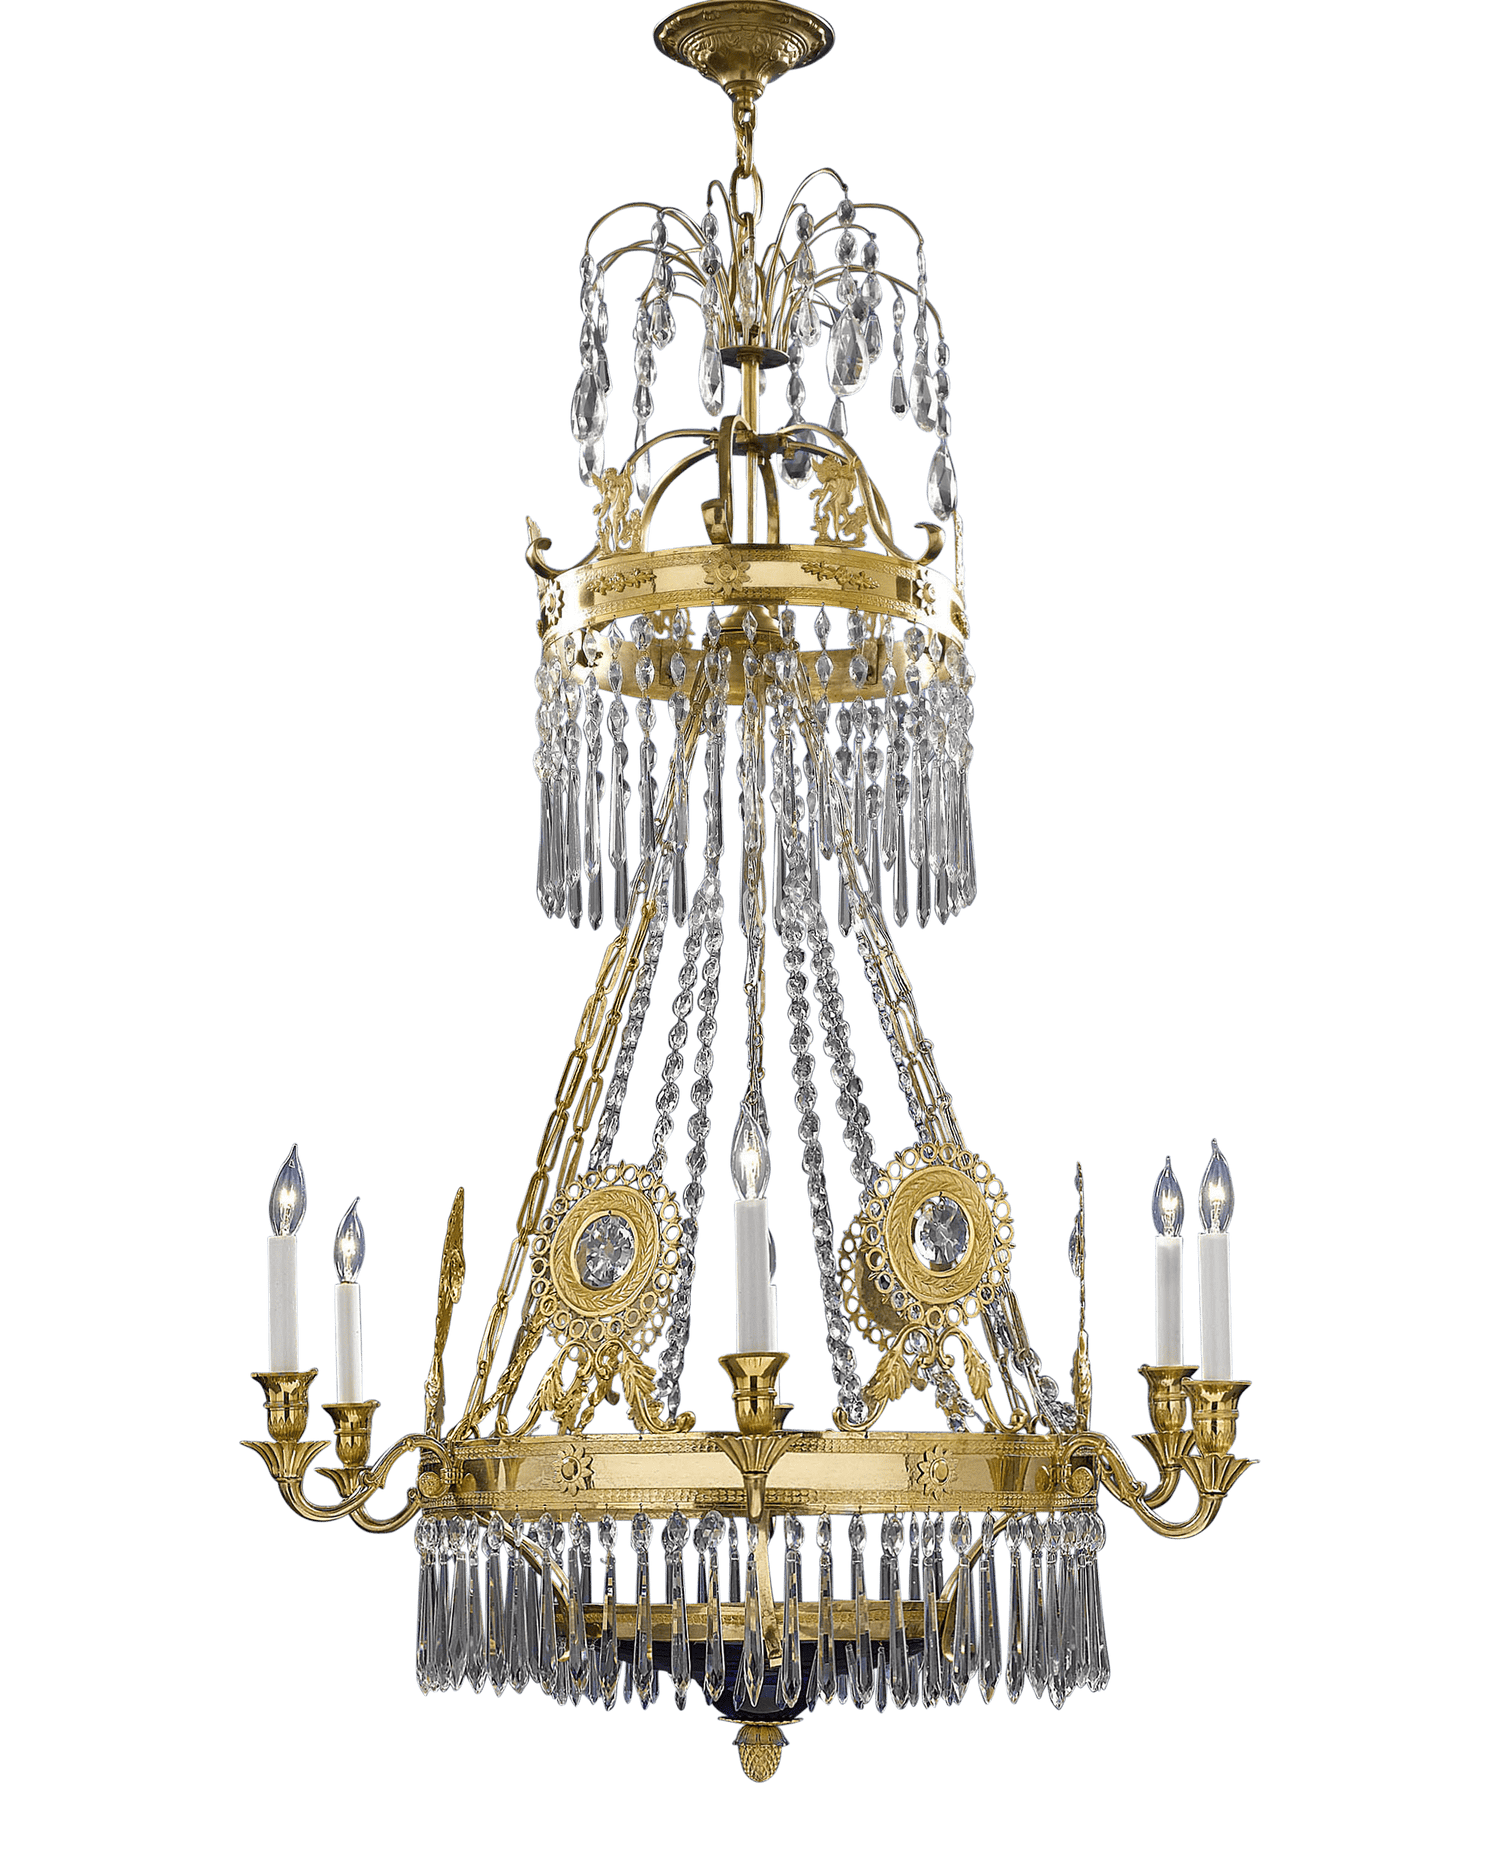 This six-light chandelier is an outstanding example of Russian glass and bronze work